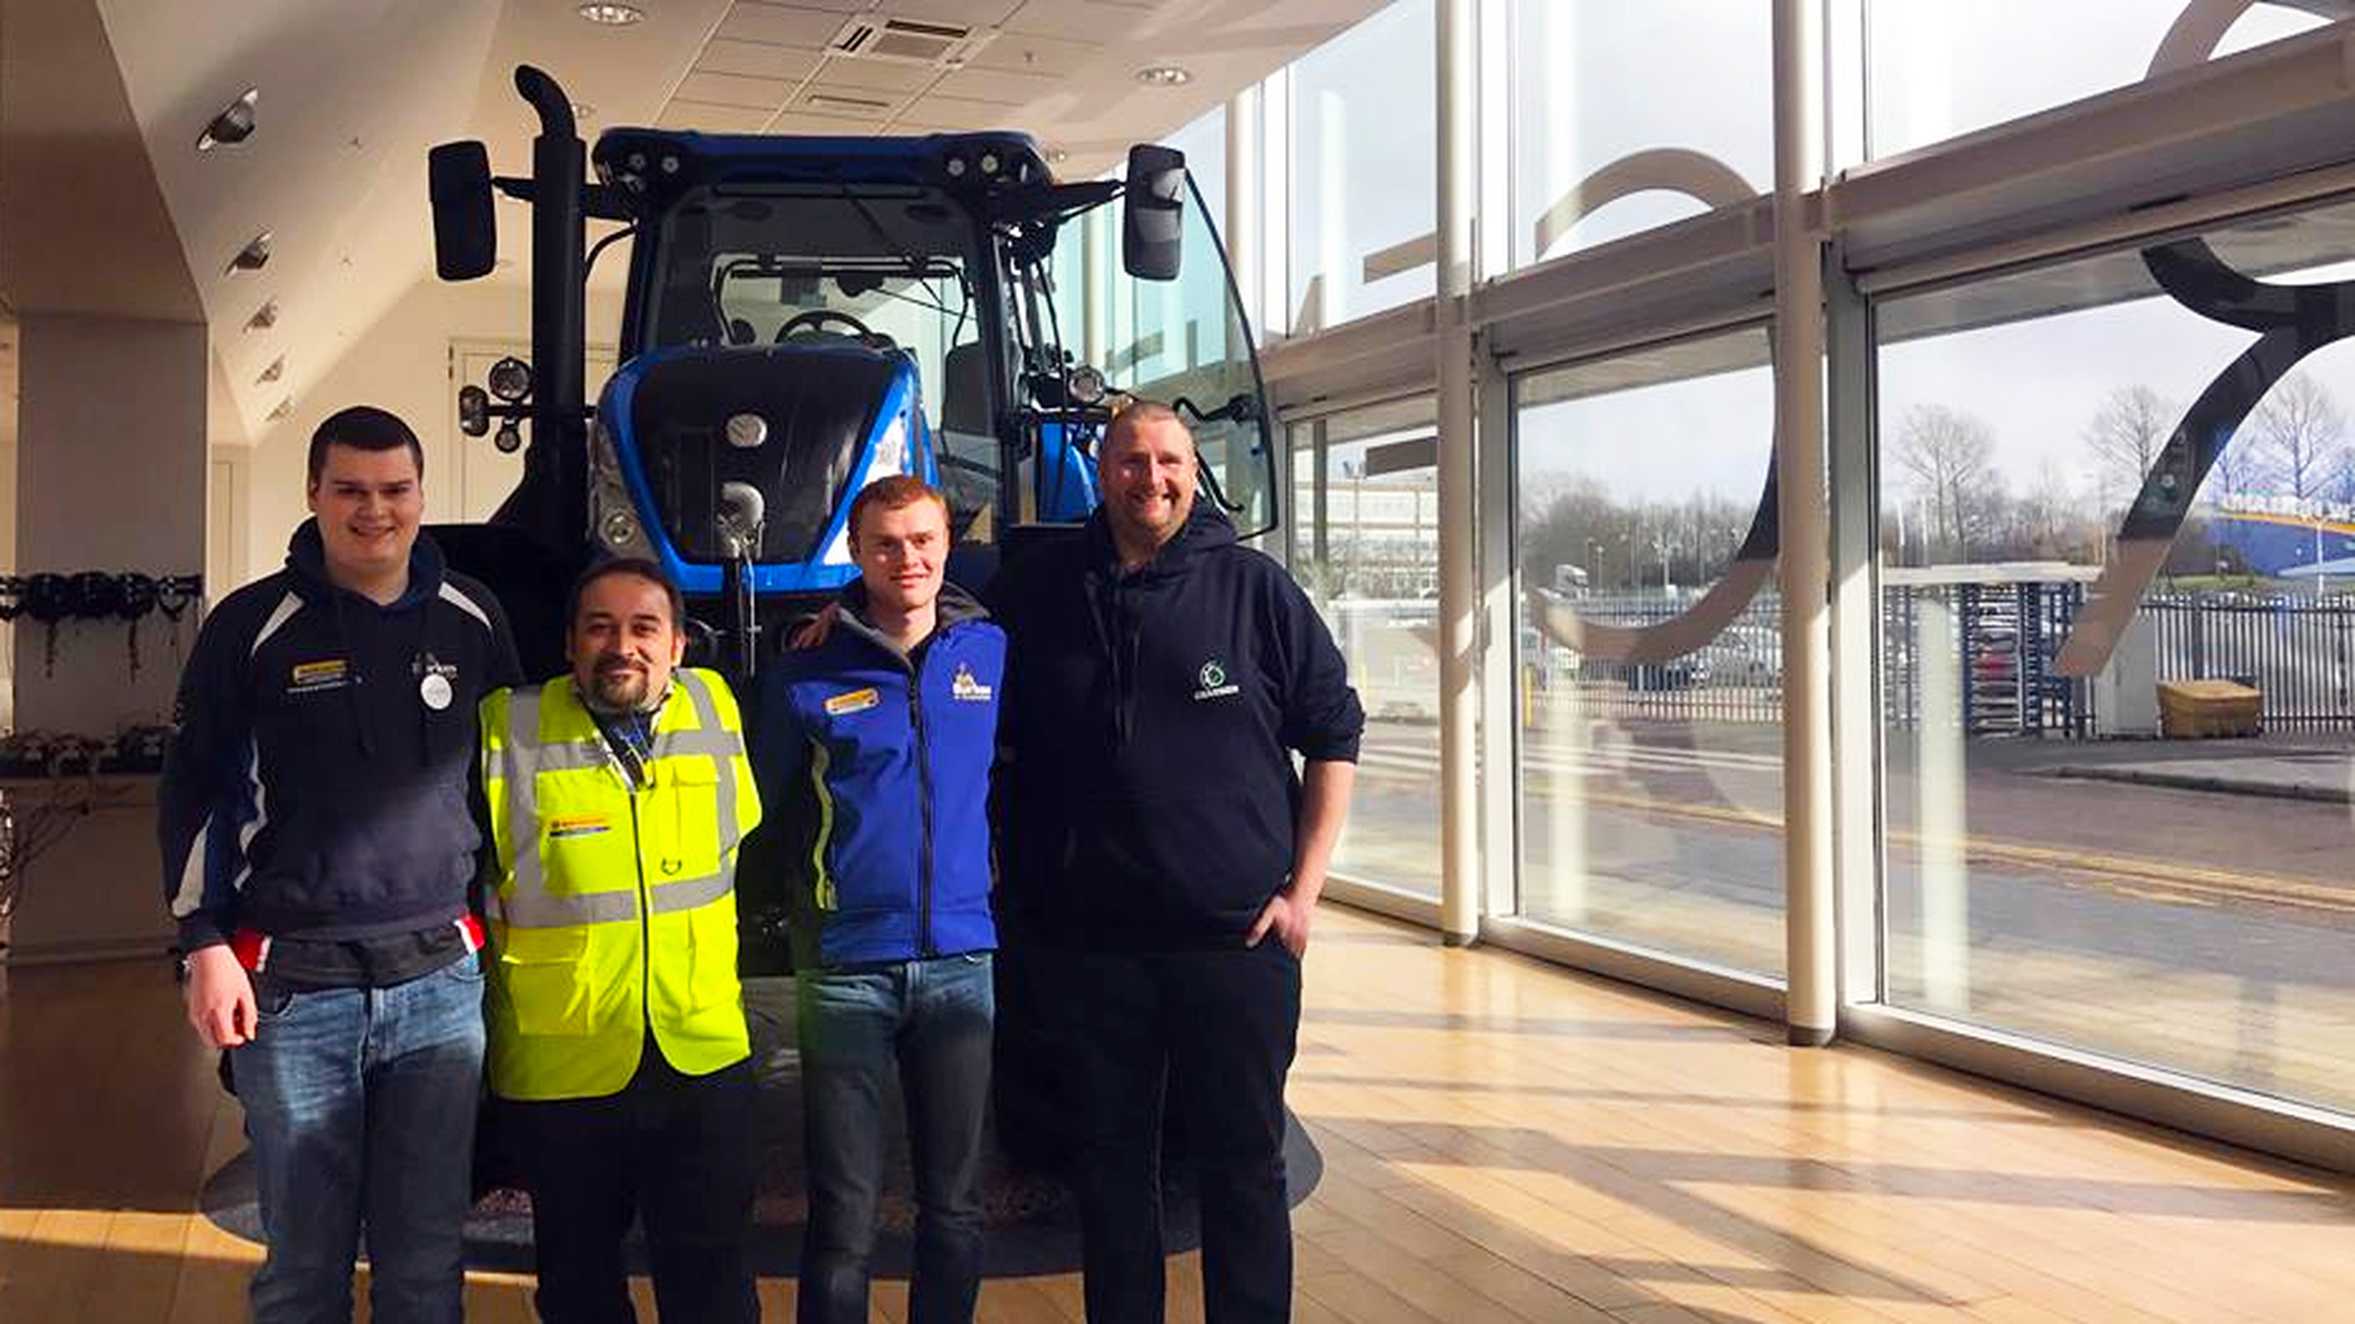 James smiling with employees smiling in front of a big tractor